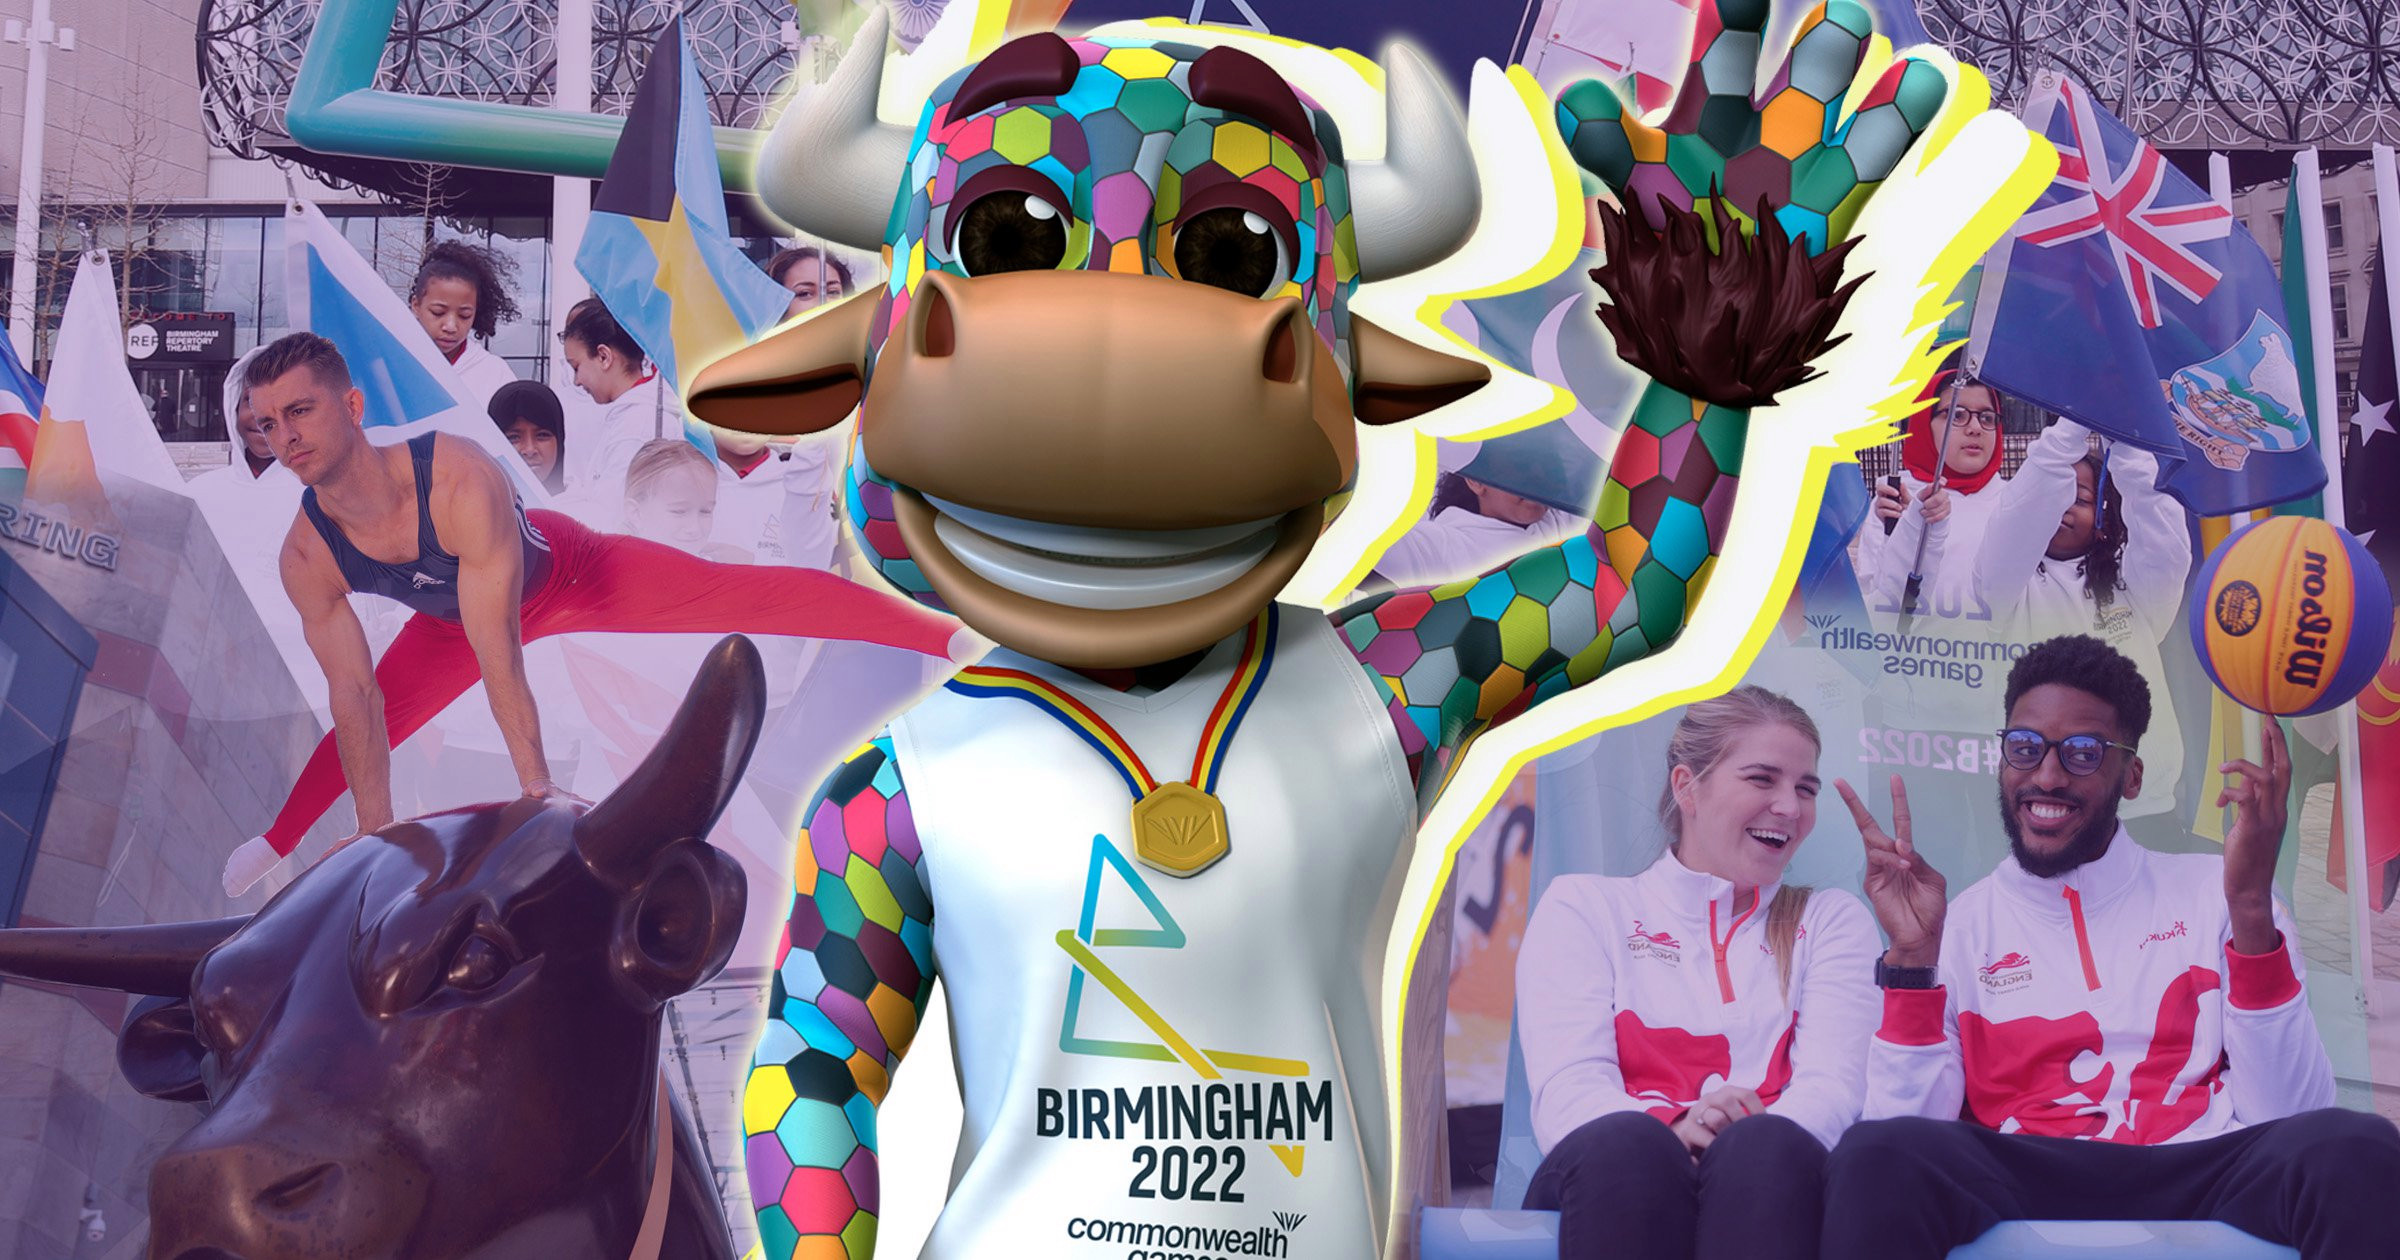 Commonwealth Games 2022: Dates, the mascot and how to get tickets and jobs there